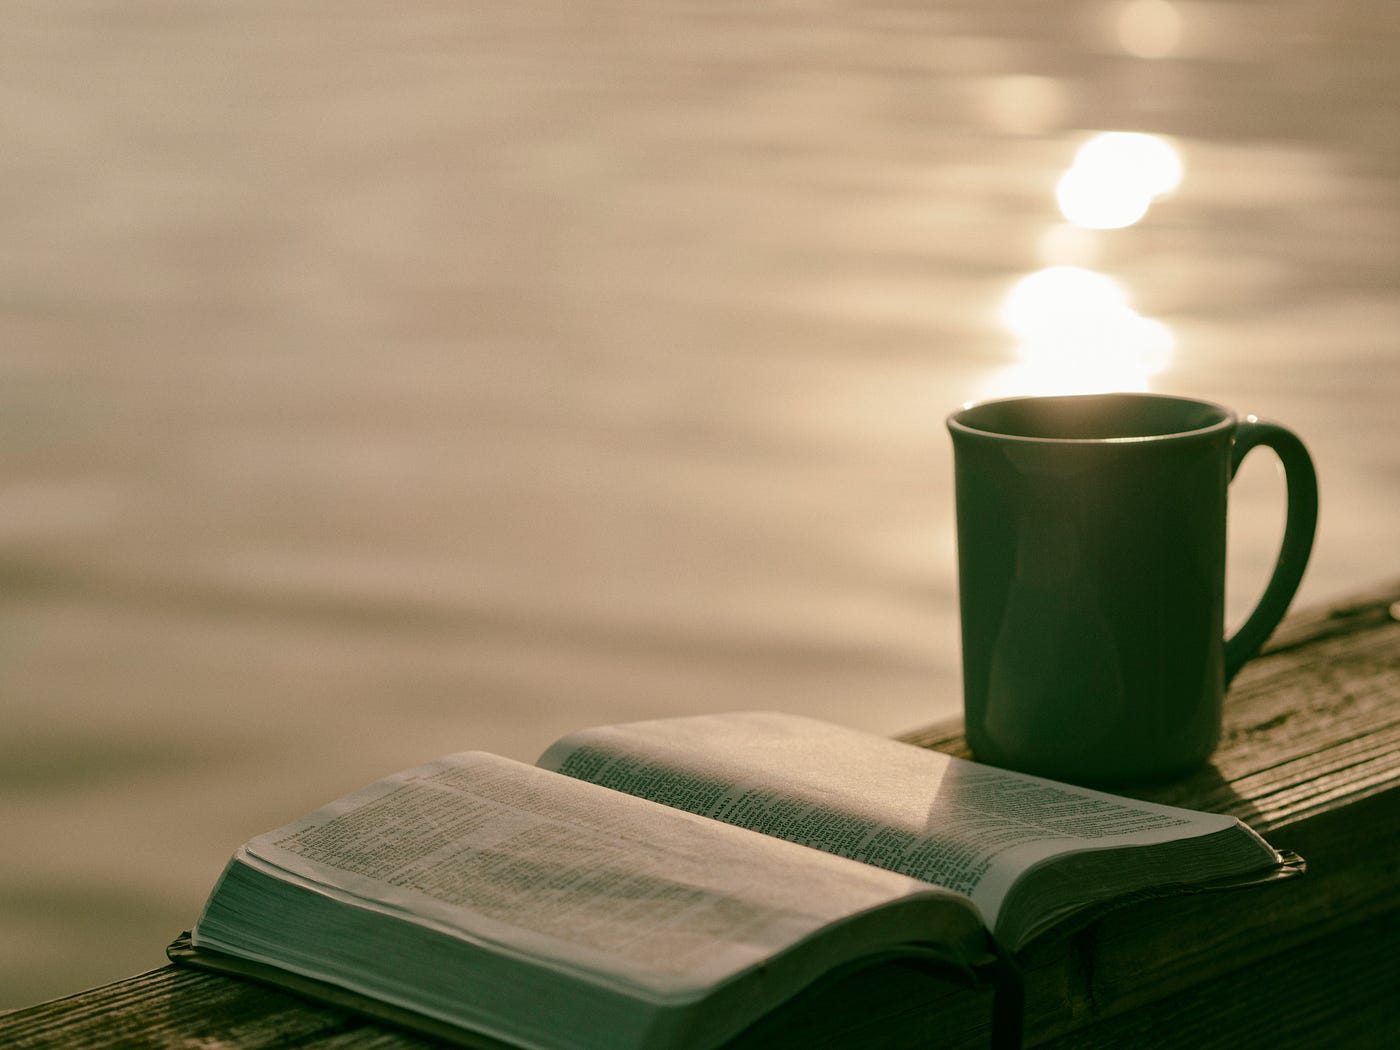 2024 Devotional Guide: Coffee with God